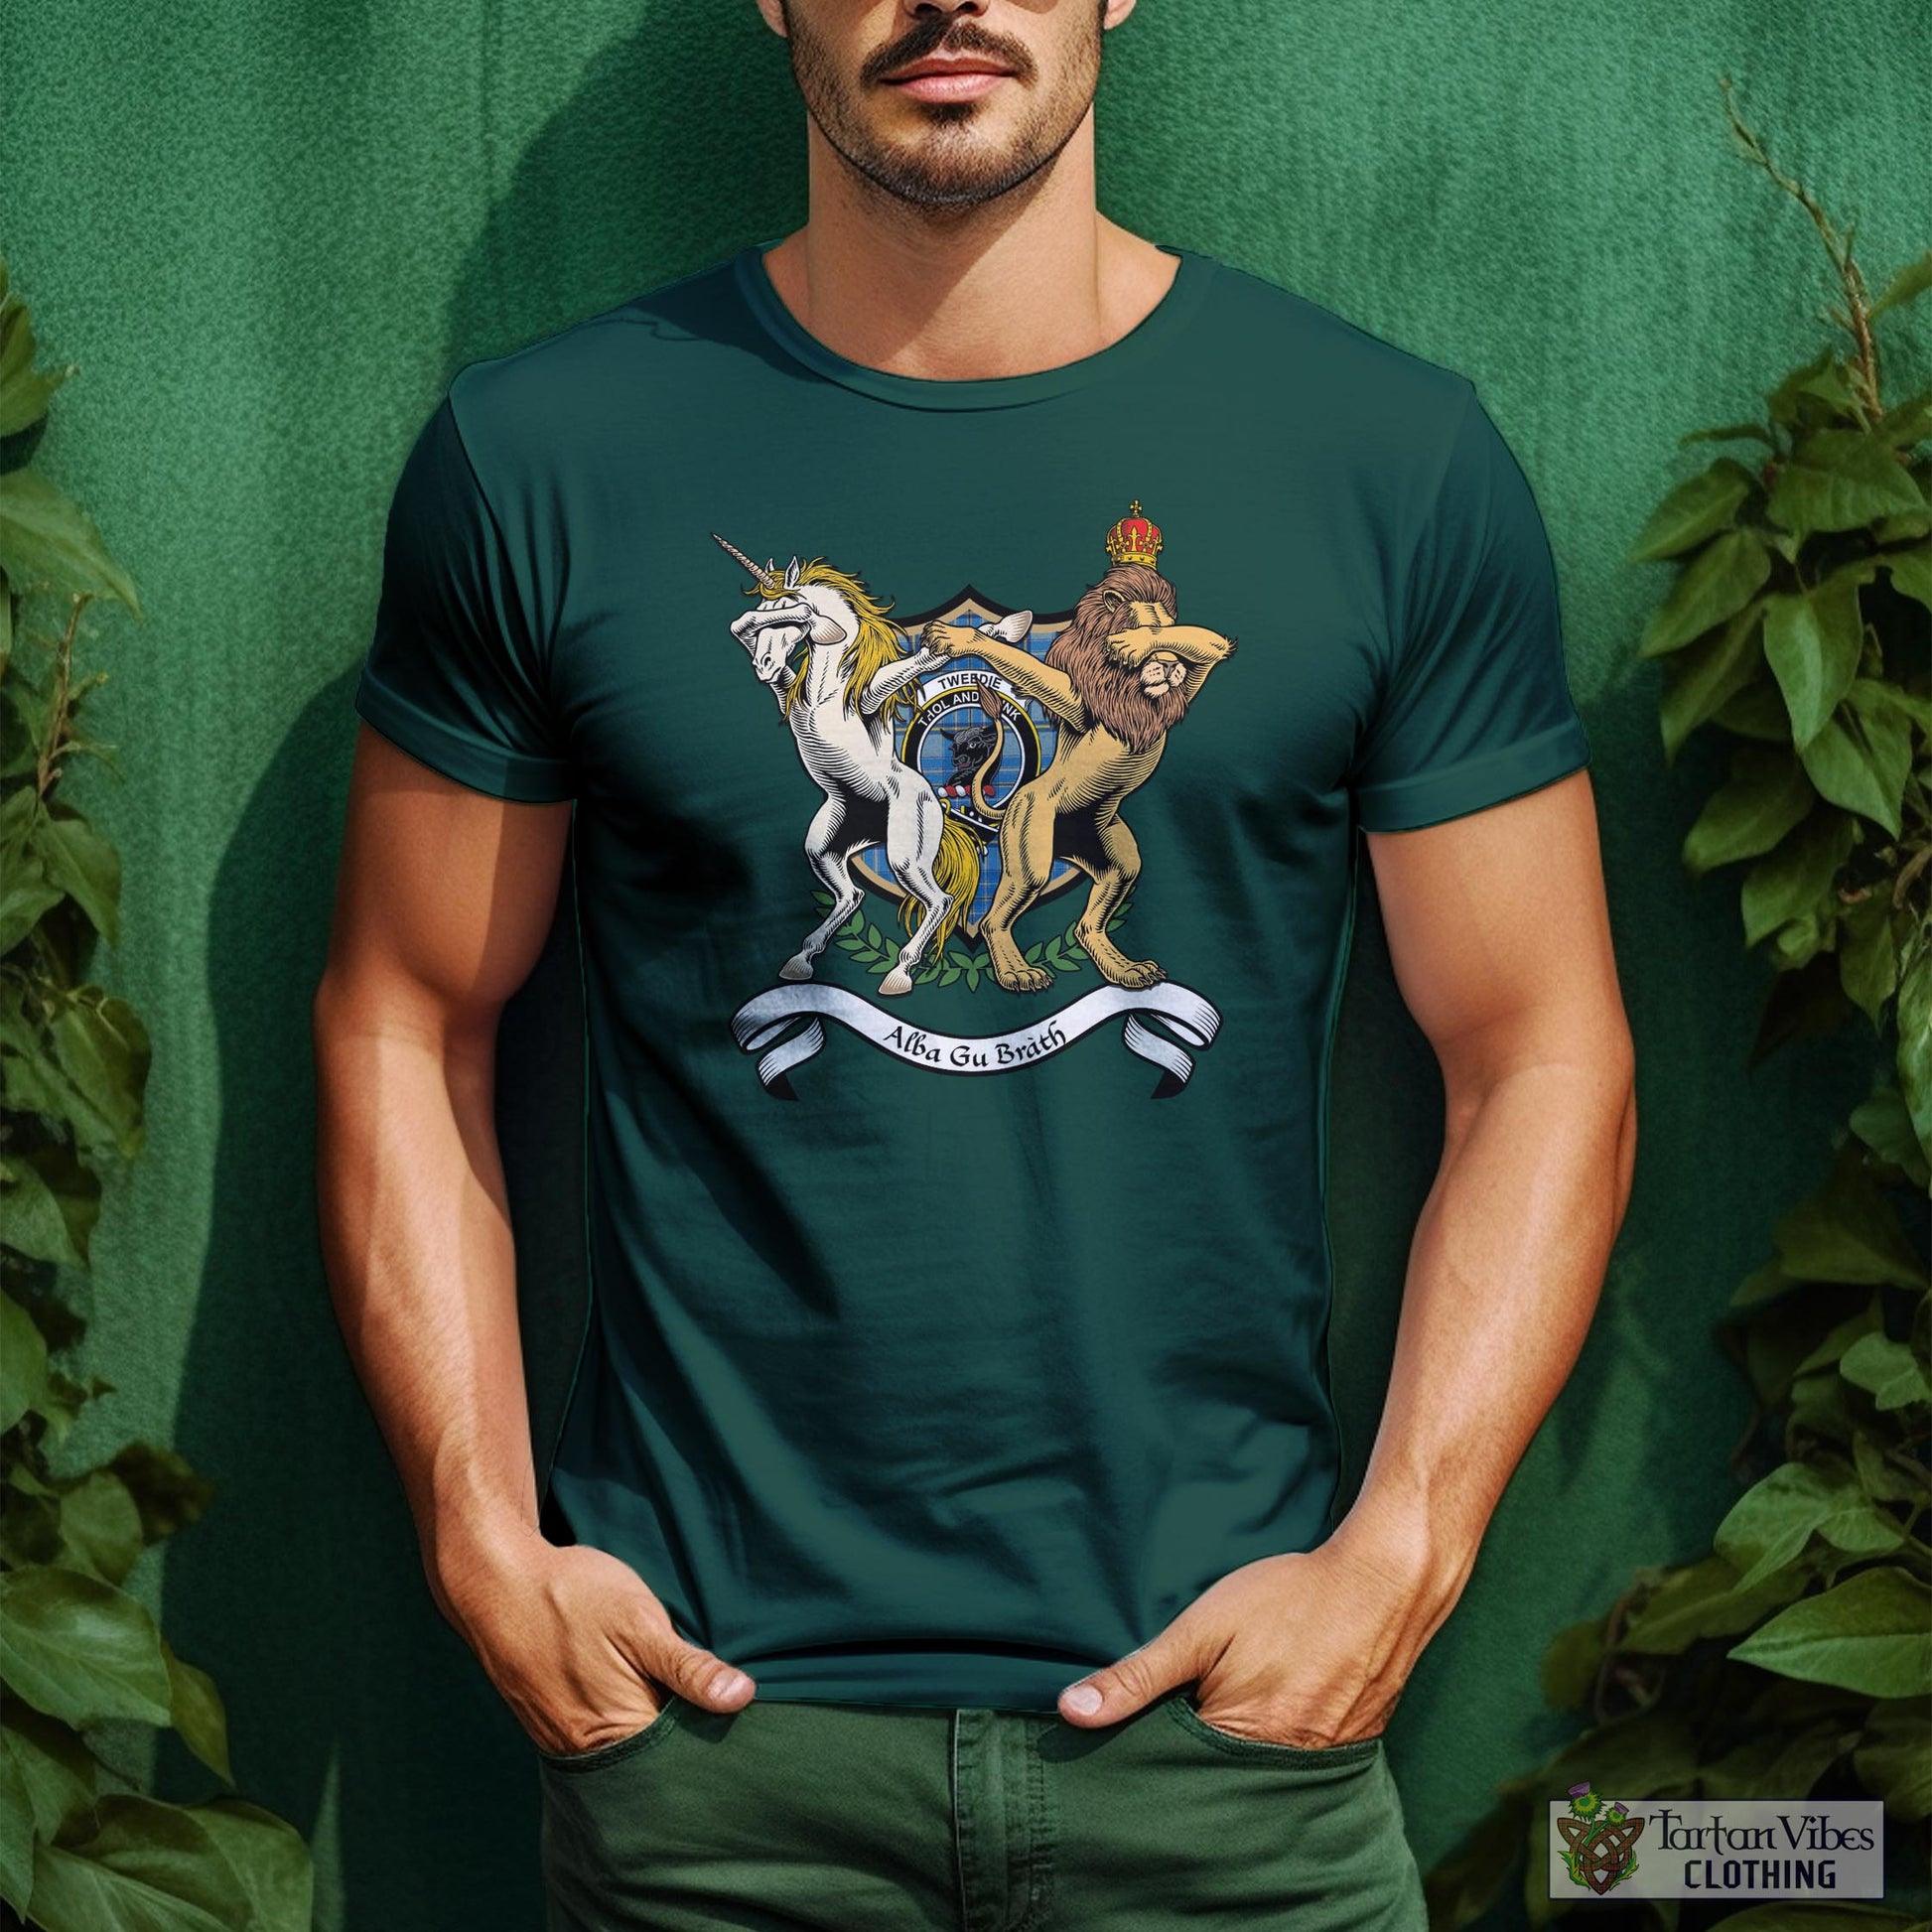 Tartan Vibes Clothing Tweedie Family Crest Cotton Men's T-Shirt with Scotland Royal Coat Of Arm Funny Style